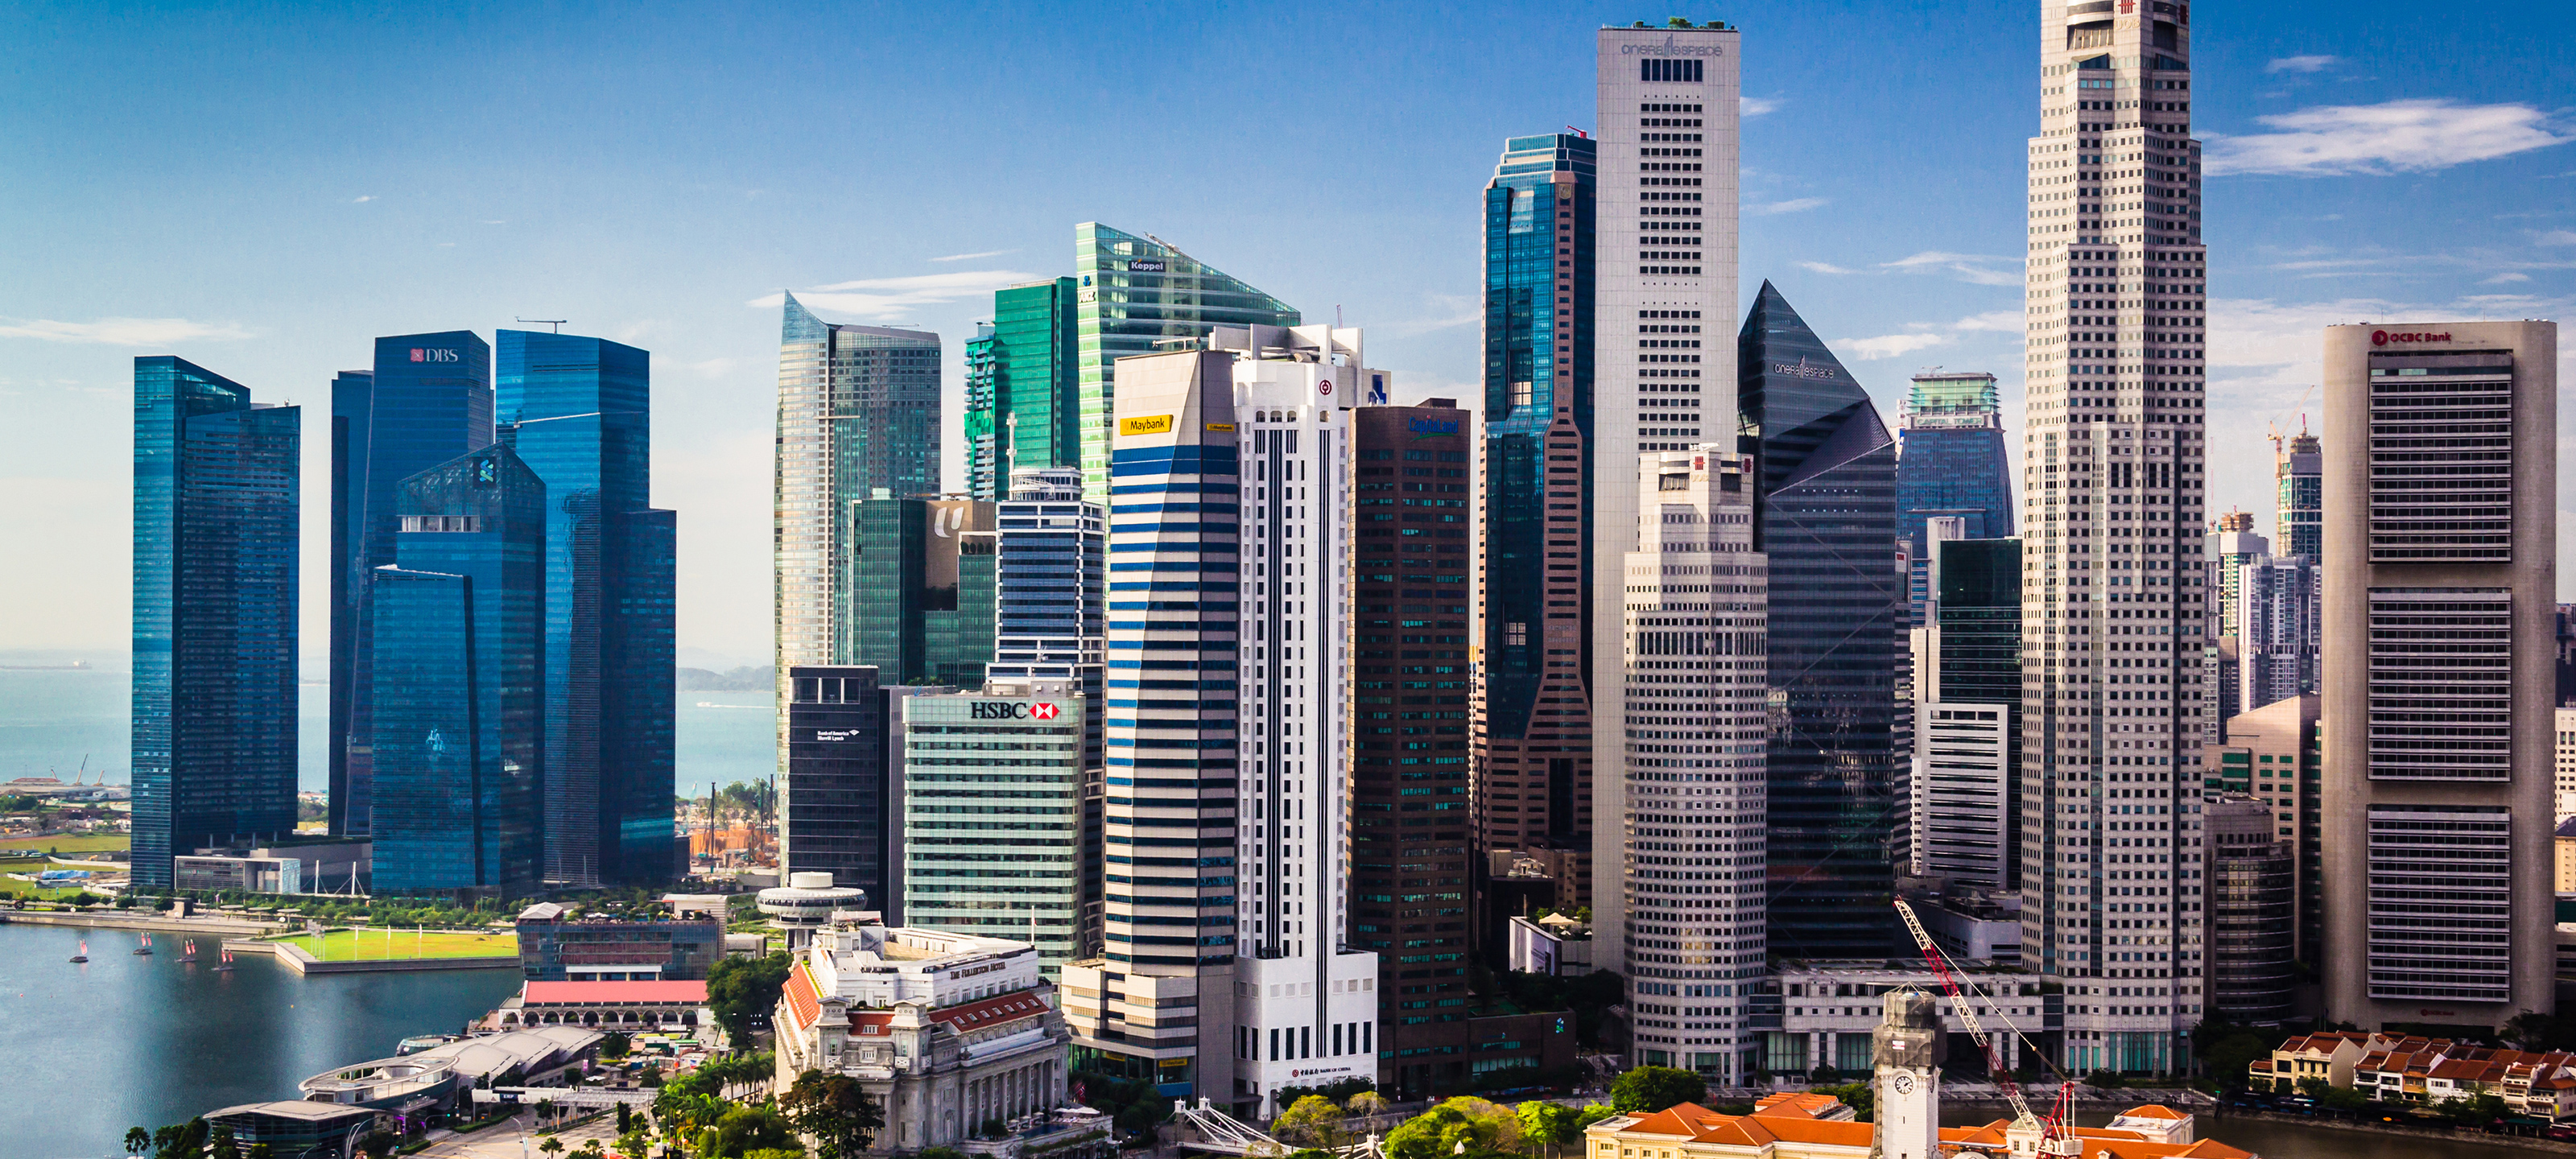 Doing business in Singapore: An introduction for multinationals | Vistra